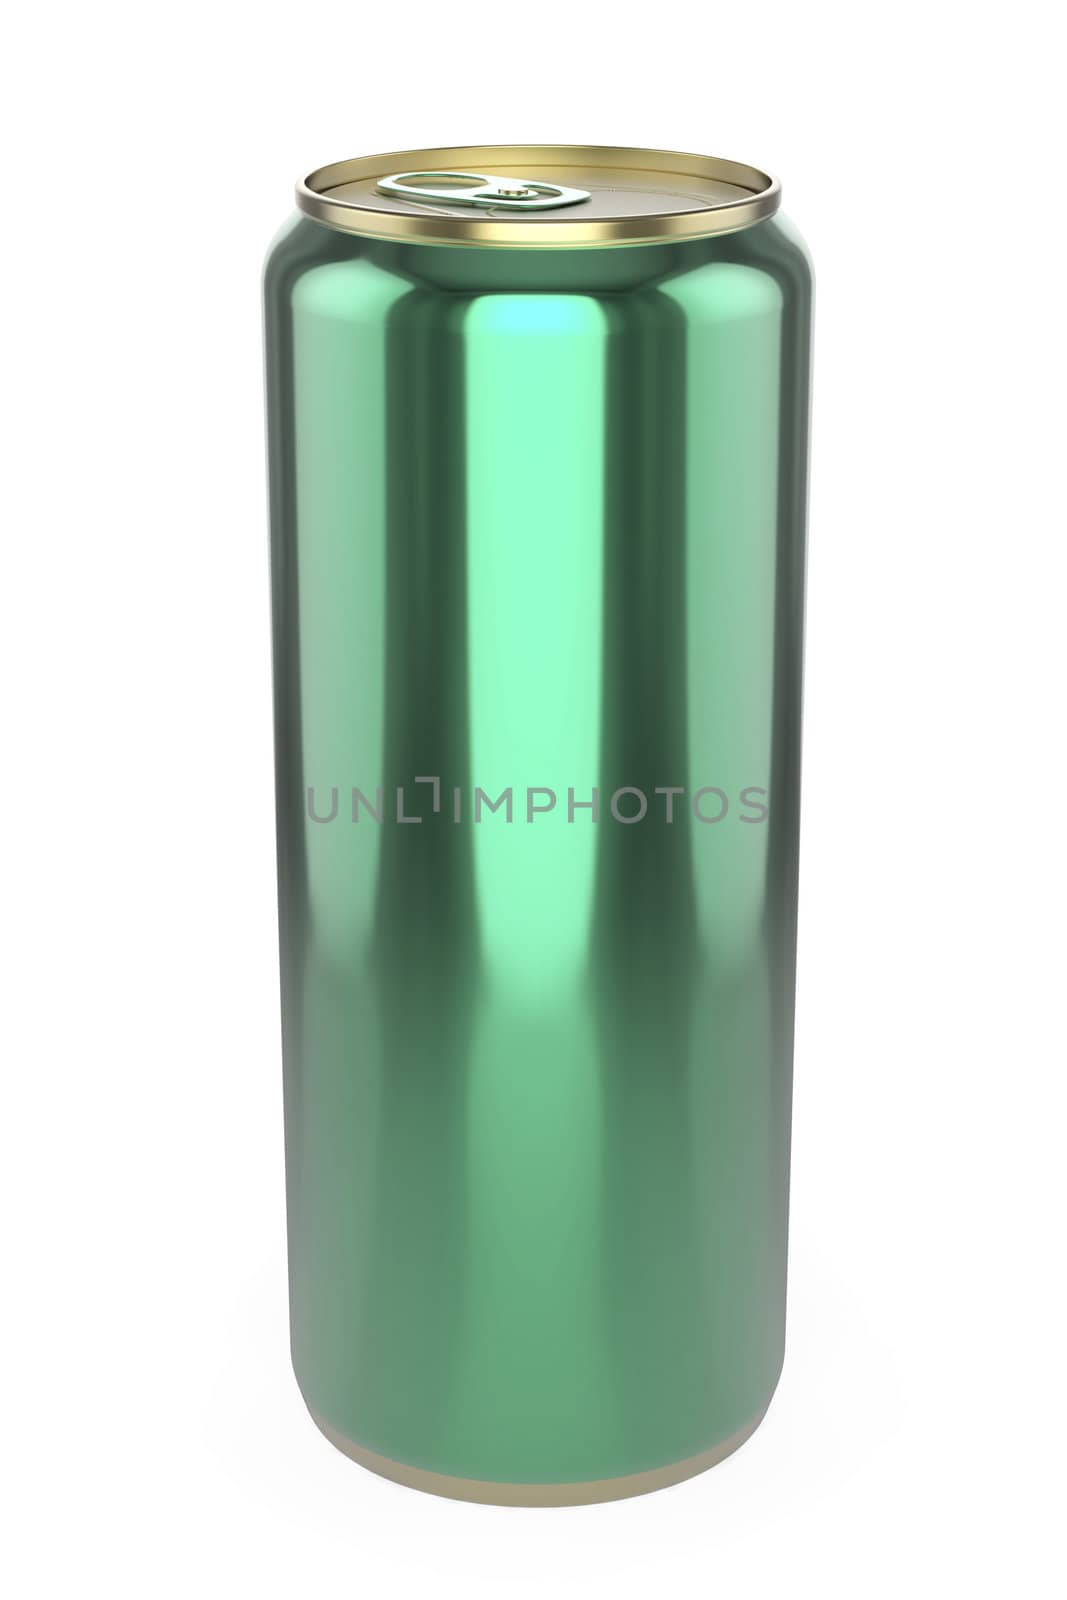 Green aluminum beer can on white background